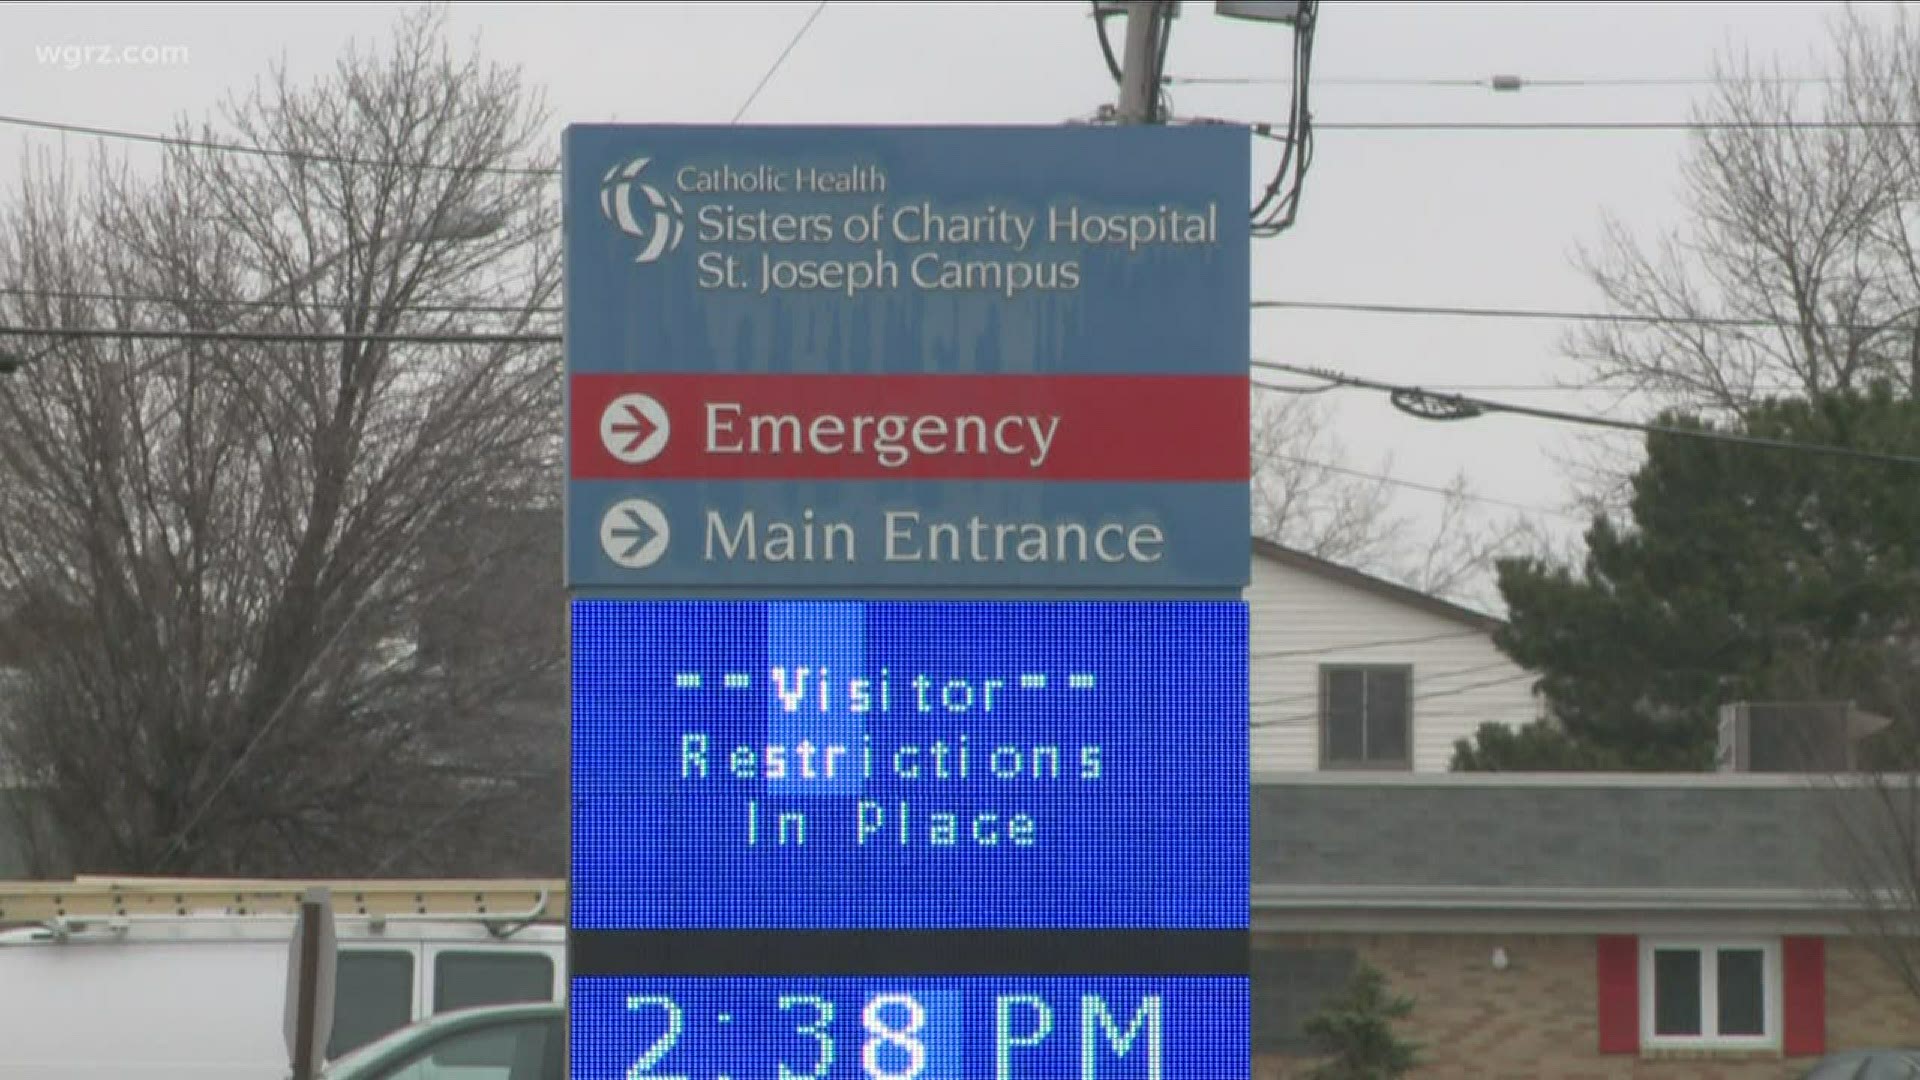 Some 2 thousand employees at two of the regions largest health care providers will find themselves out of work starting Sunday on month-long furloughs.